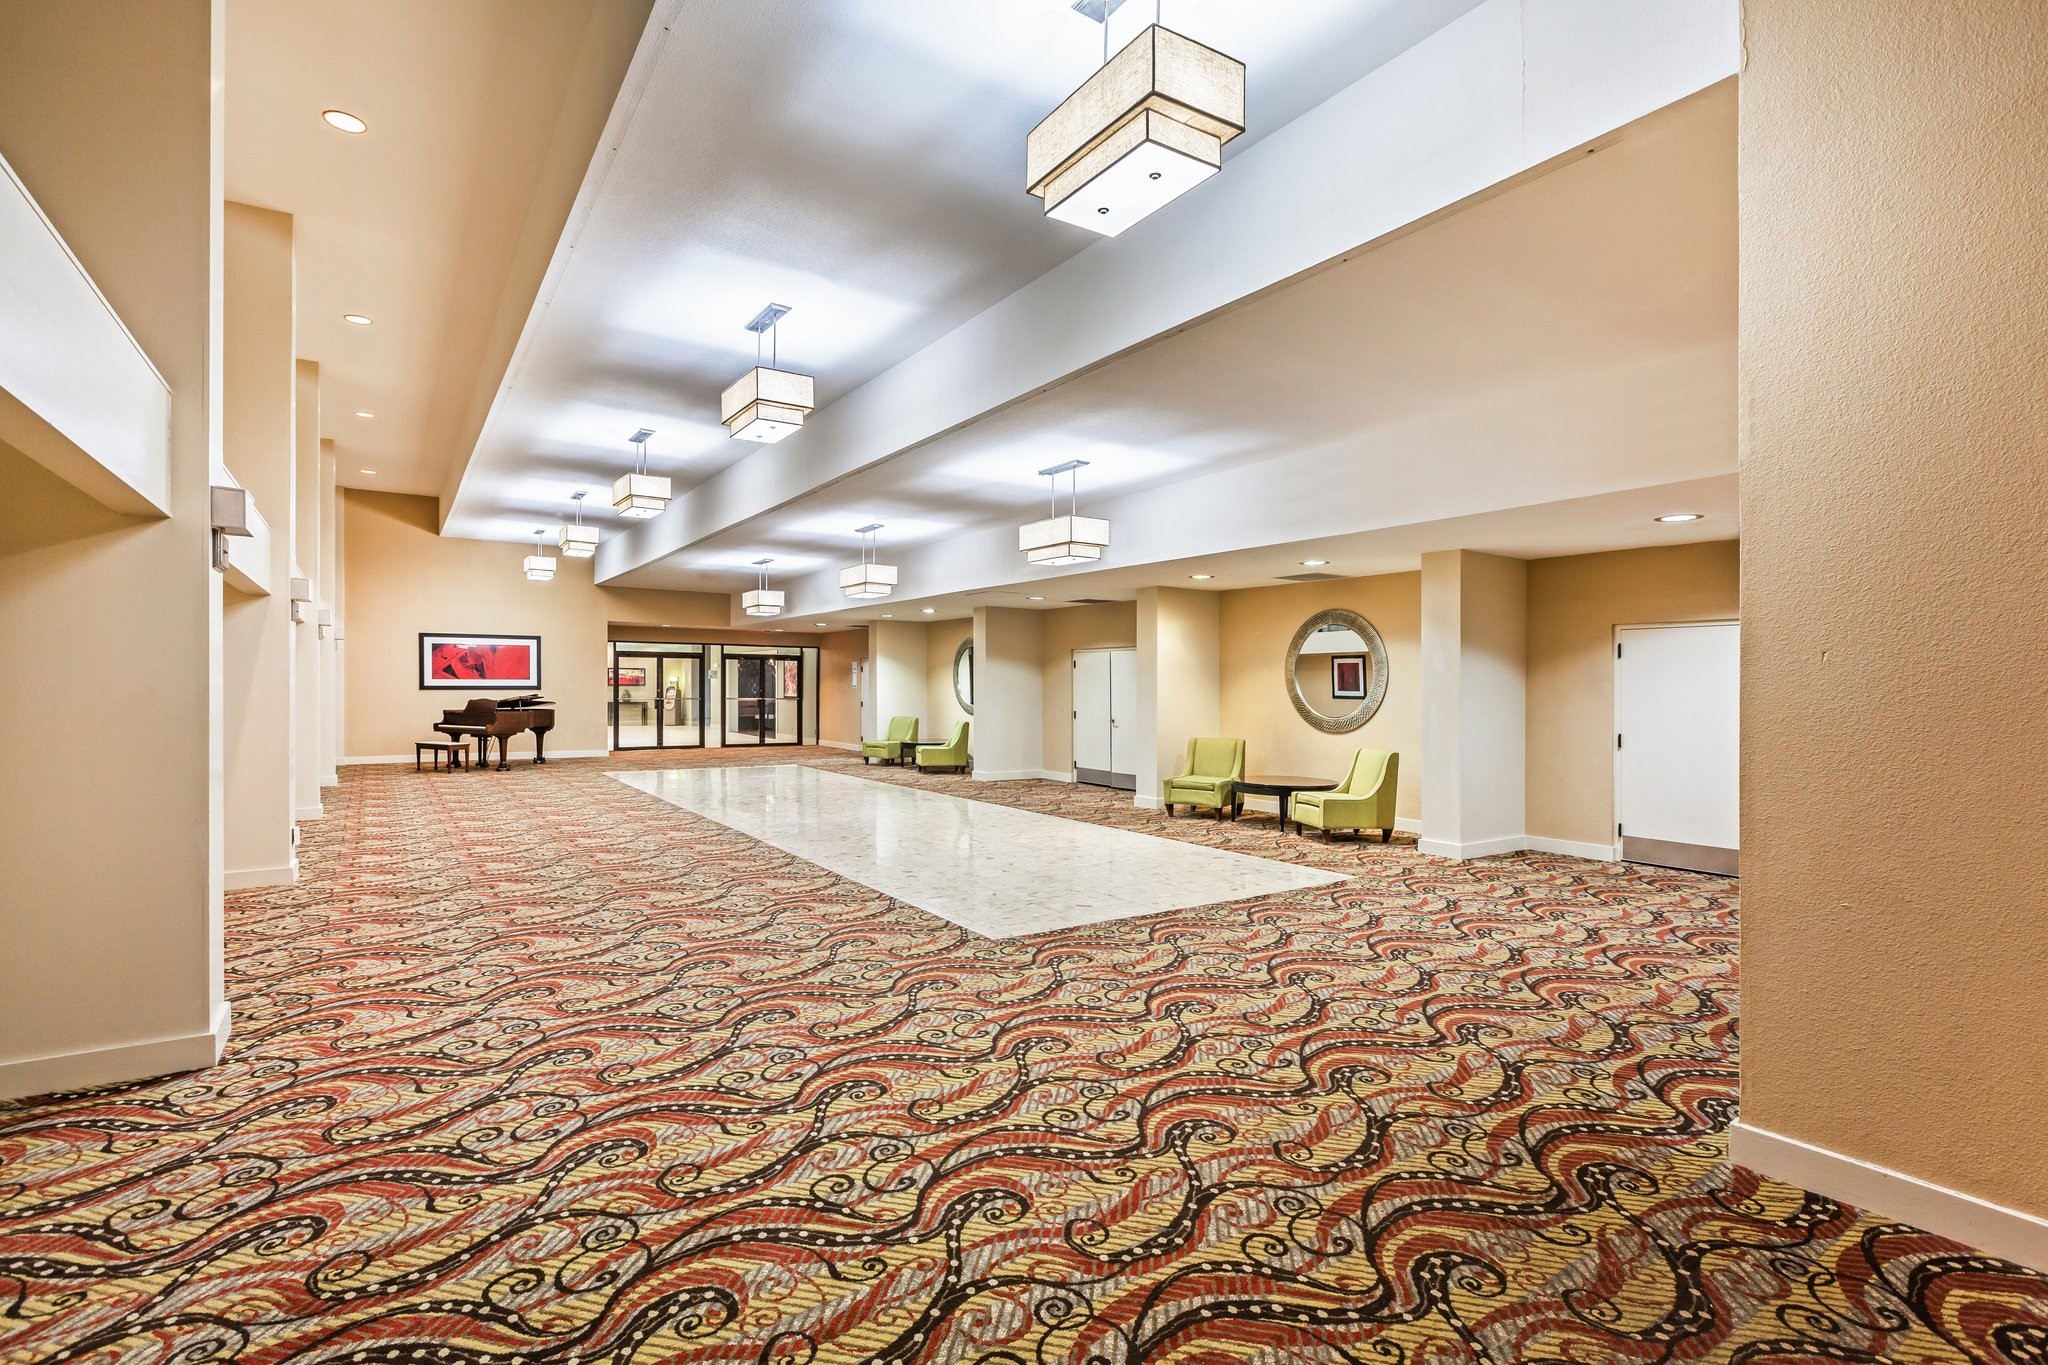 Meeting Rooms at Holiday Inn TYLER CONFERENCE CENTER, 5701 SOUTH